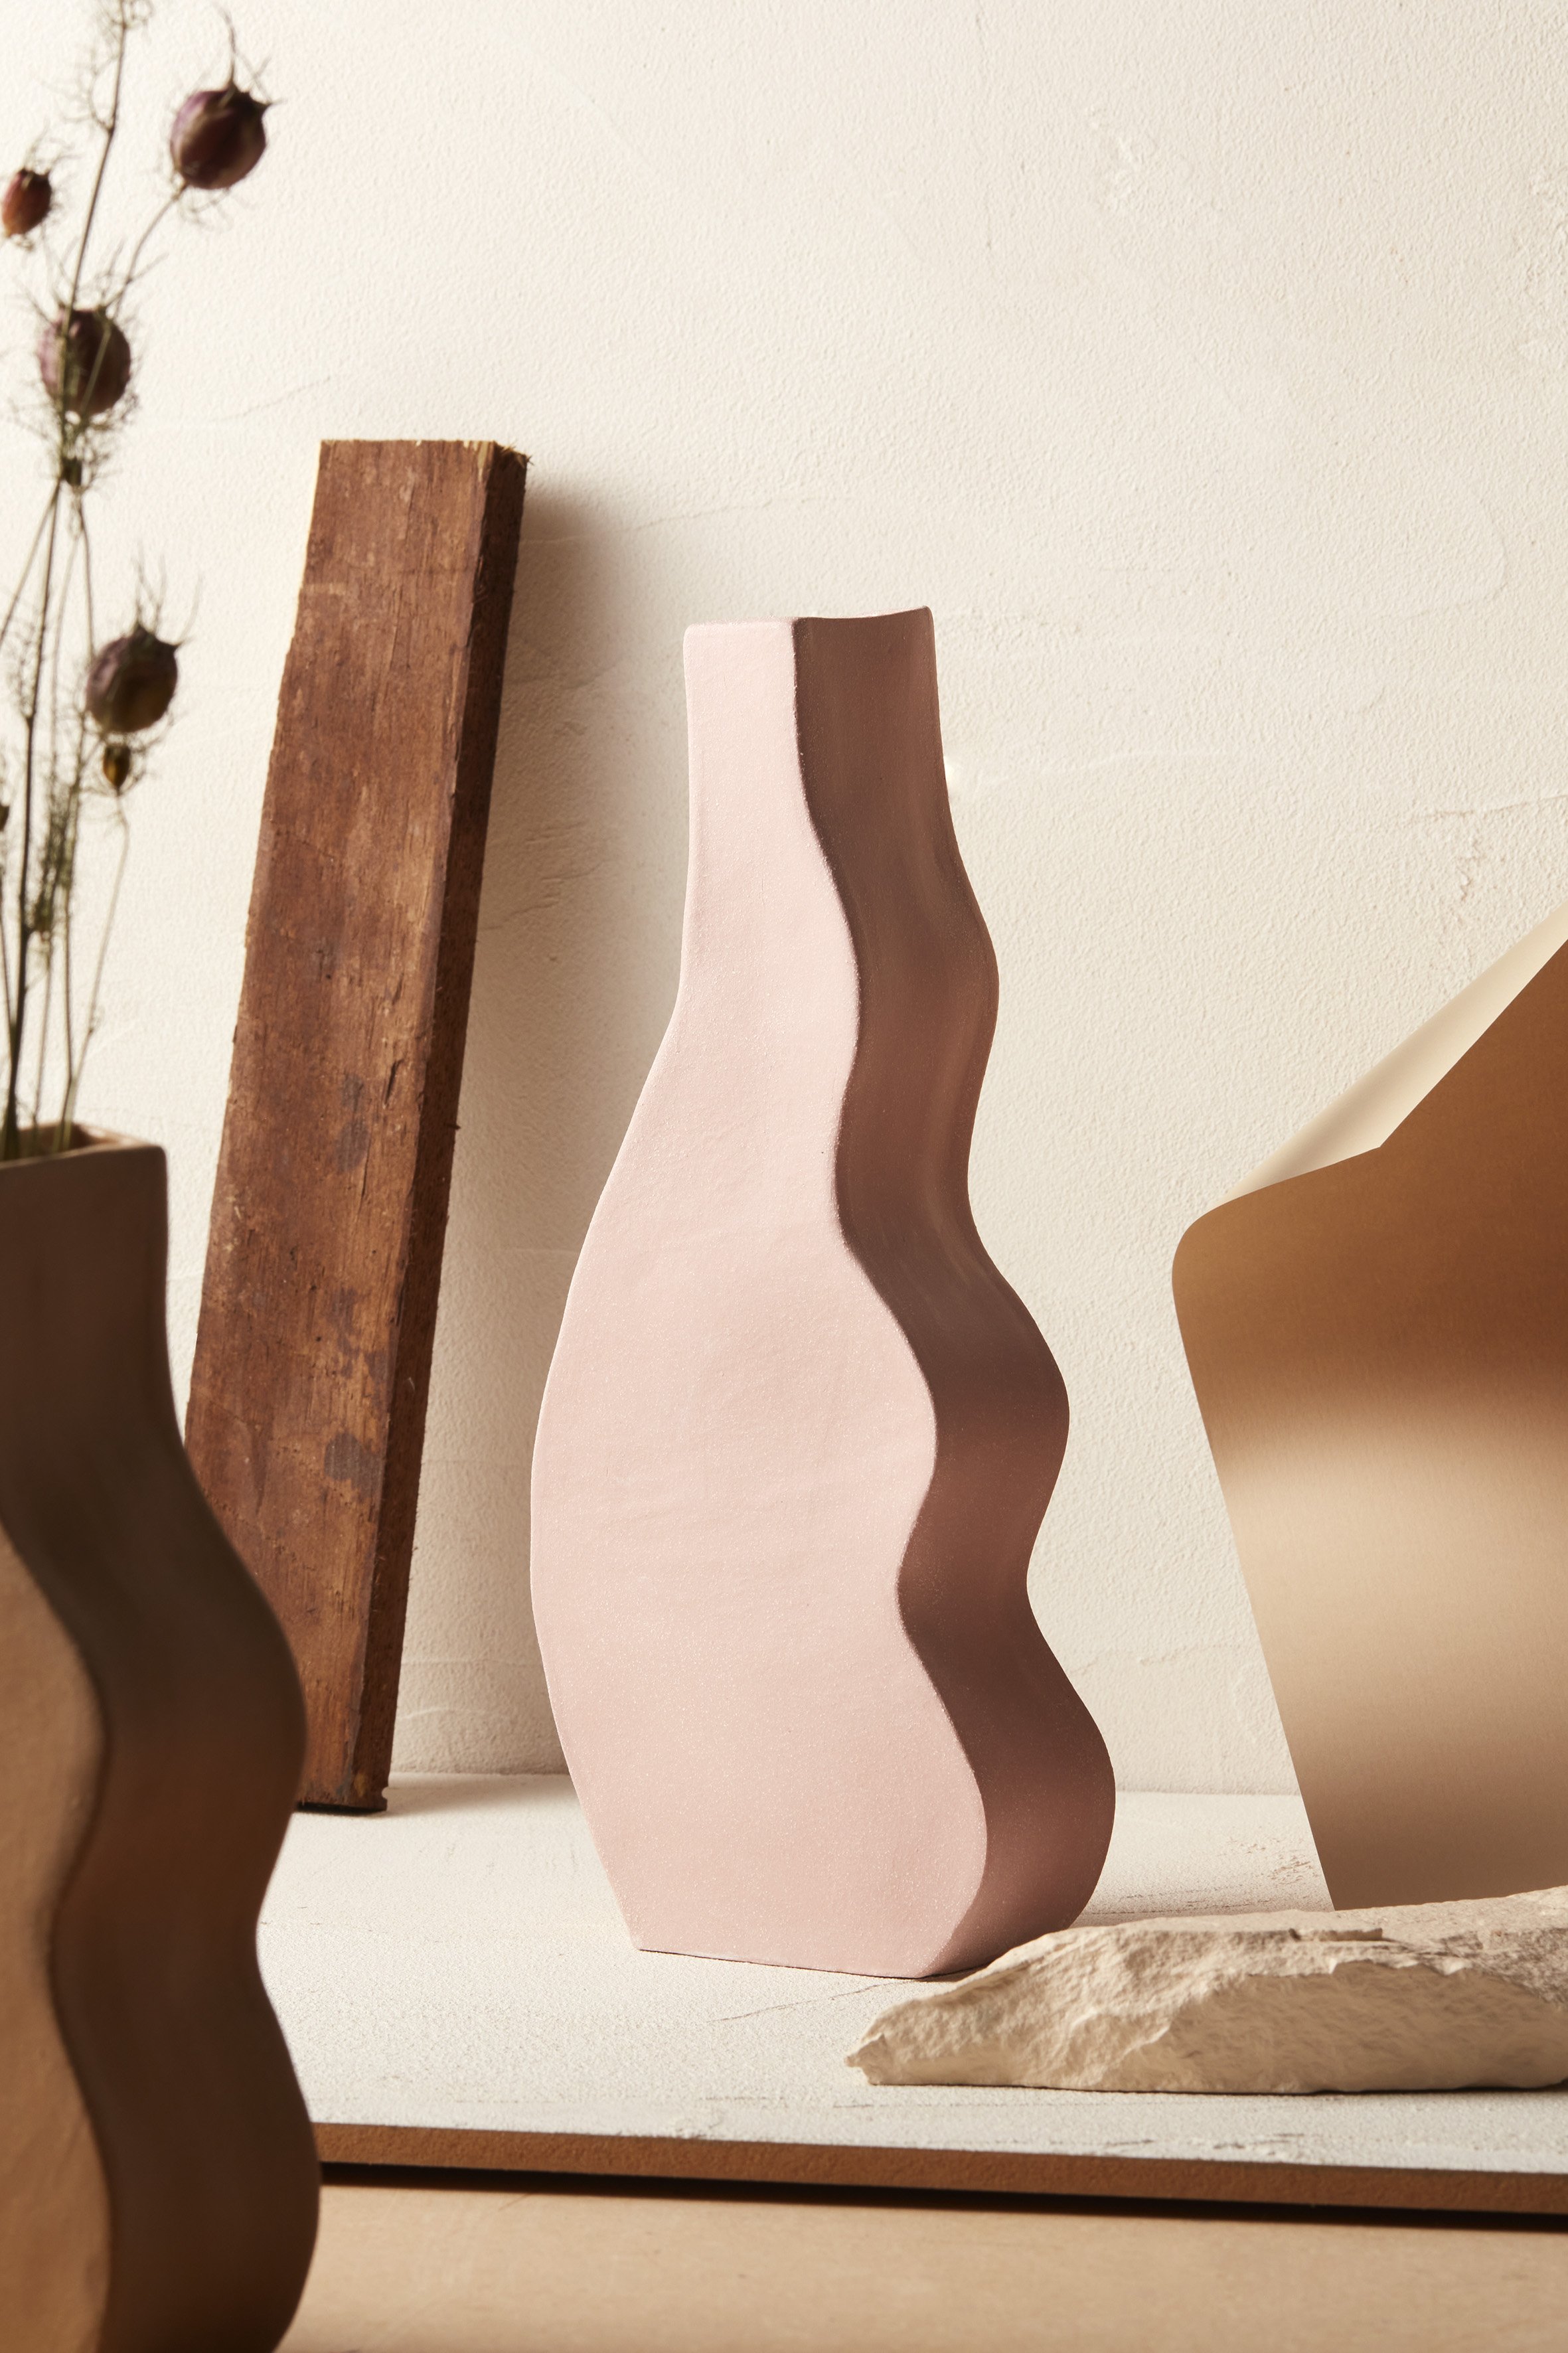 Curvy abstract vase designed by Miyelle Ceramics